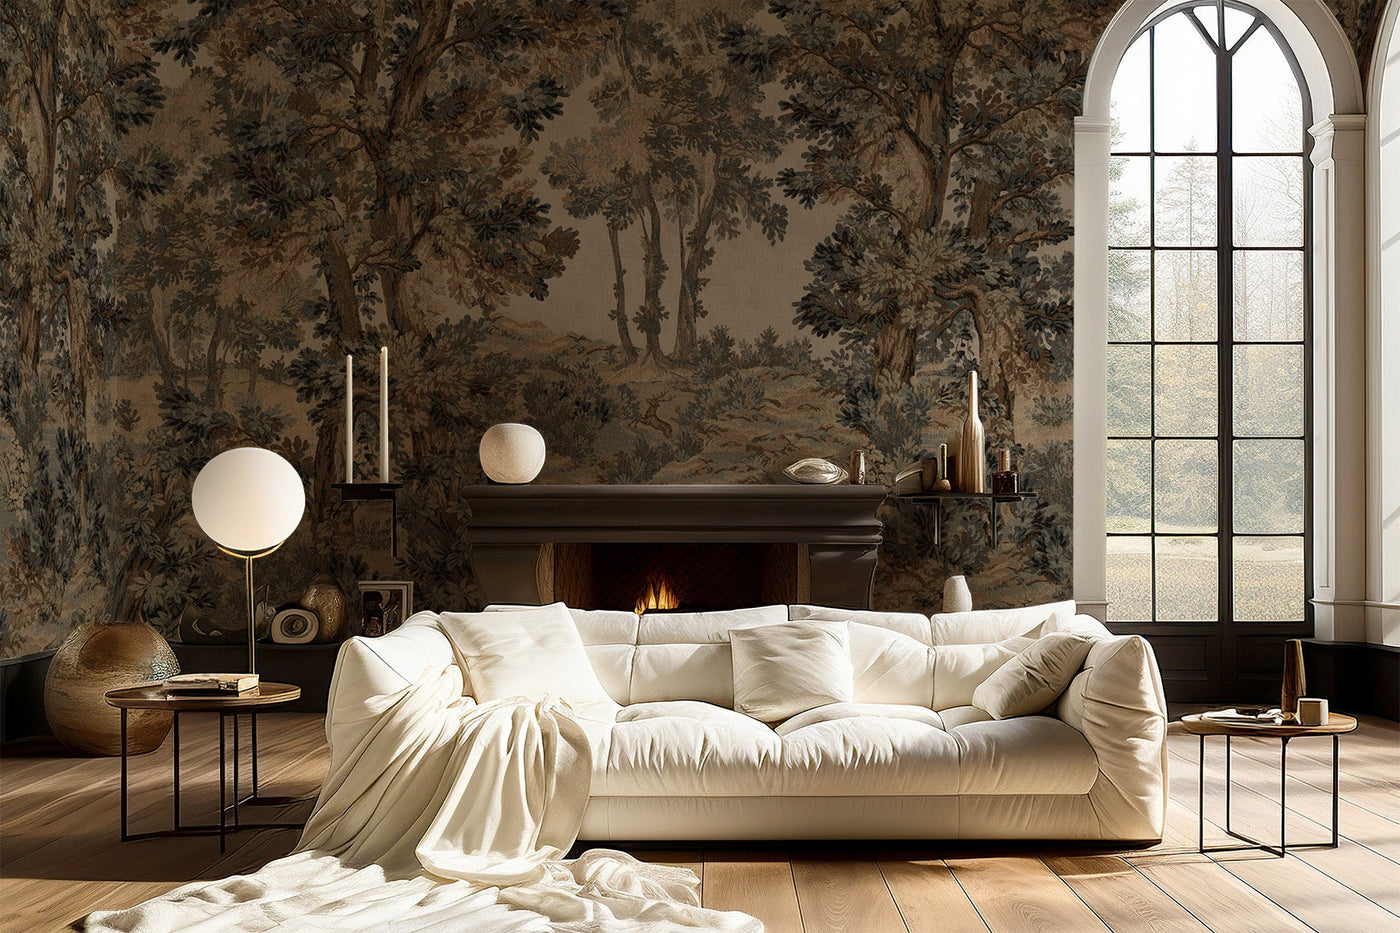 tapestry wall mural on the wall of this livign room. White sofa with white cushions and throw. Wooden floor and 2 smal side tables. A round Flow lamp and a dark wooden side bench 